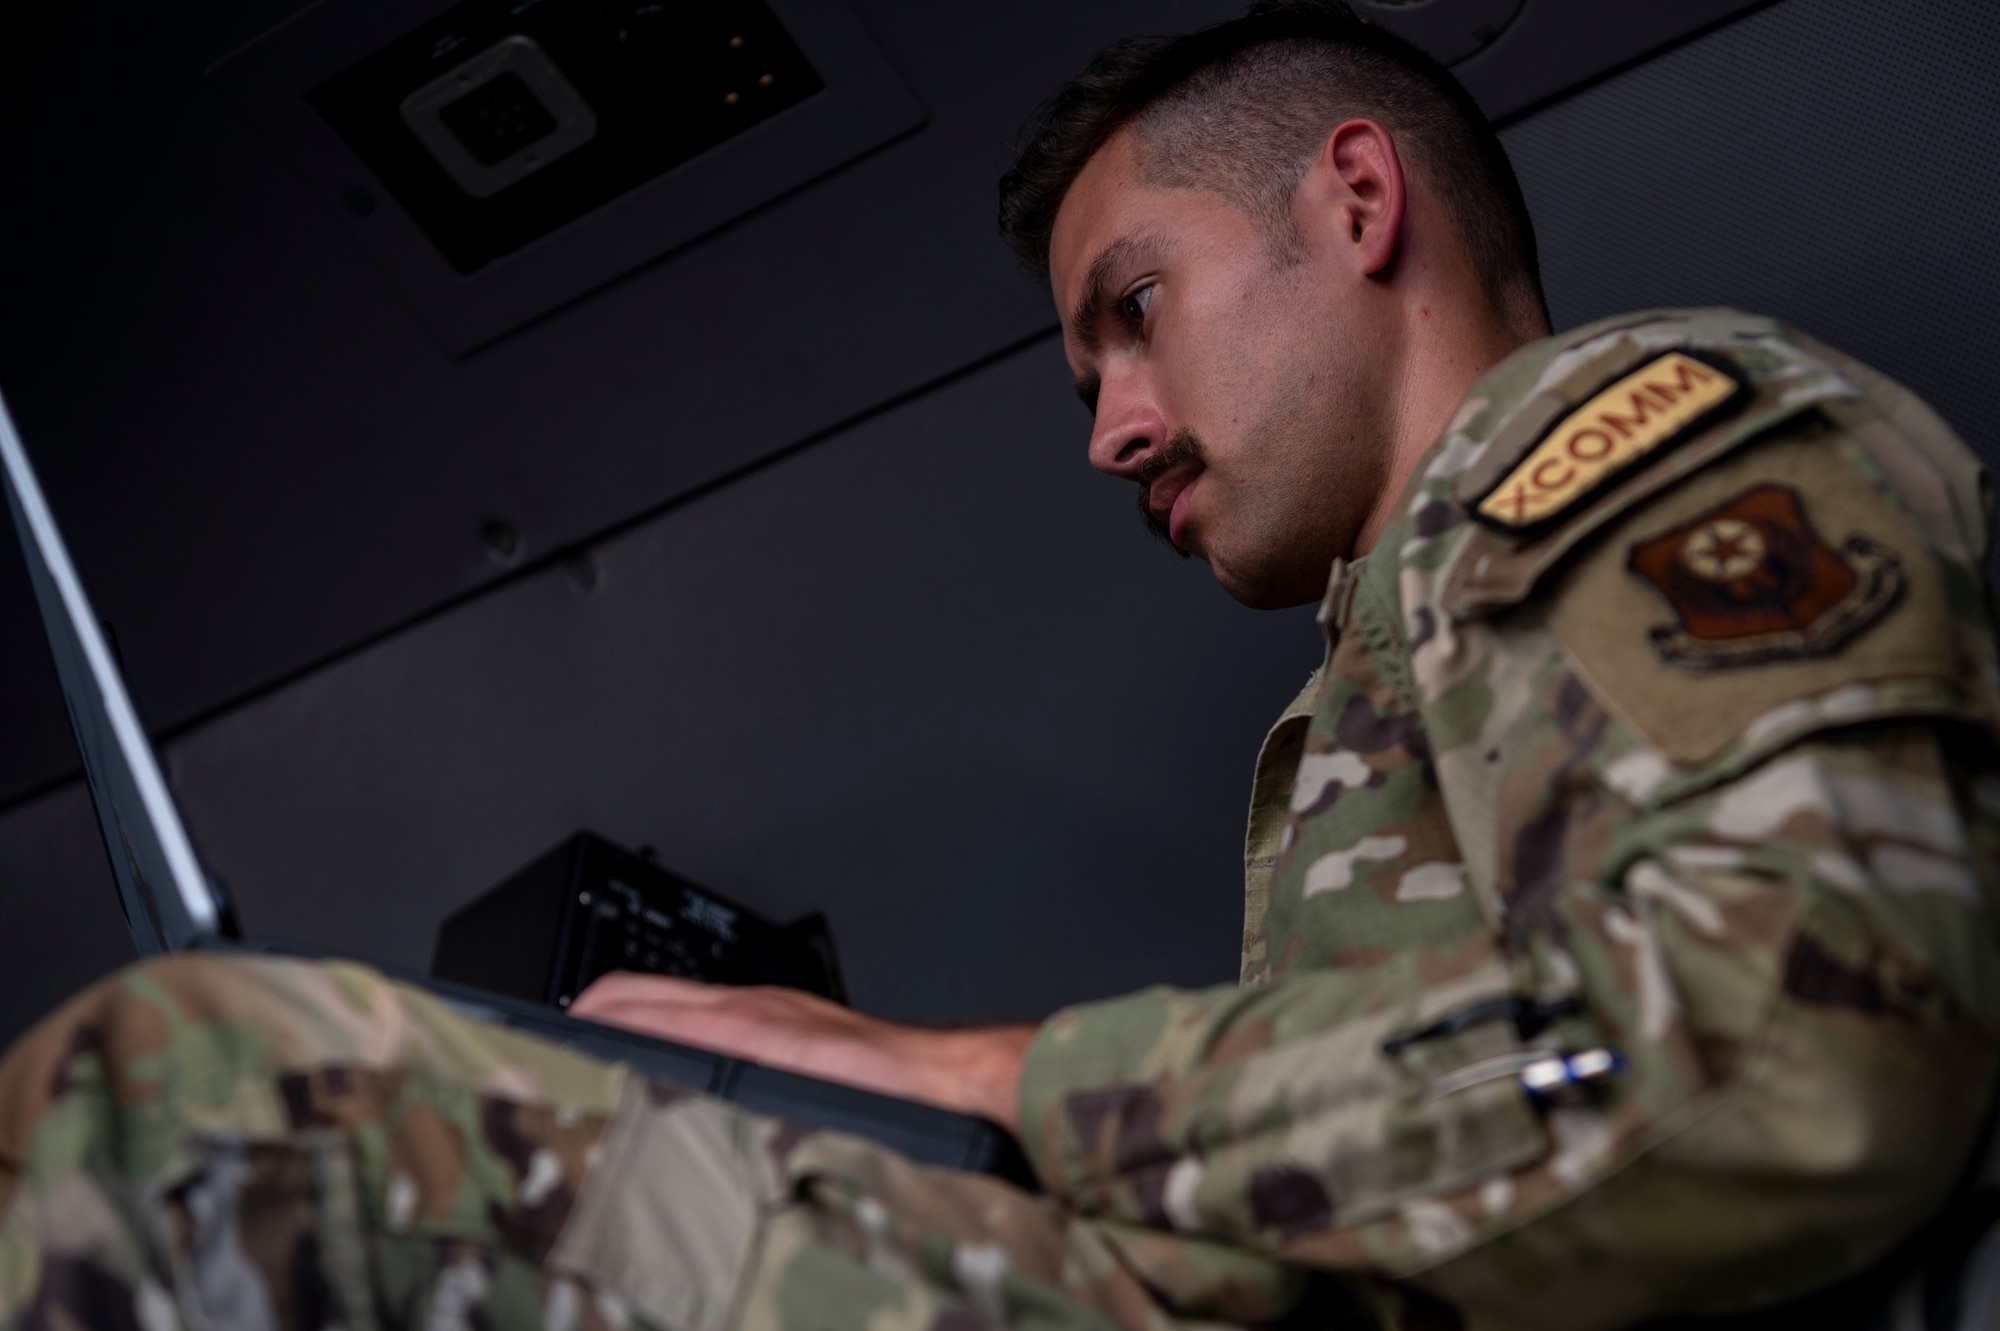 U.S. Air Force Senior Airman Austin Nordstrom, an Airborne Mission Network technician assigned to the 1st Special Operations Communications Squadron, configures and troubleshoots the networking equipment that provides Beyond-Line-Of-Sight, or BLOS, capabilities for an U-28A Draco, Aug. 4, 2022 at Hurlburt Field, Florida. The BLOS system allows sensor operators to remain connected on the battlefield, ensuring we can identify ground forces as well as identify enemy targets in remote/austere locations.